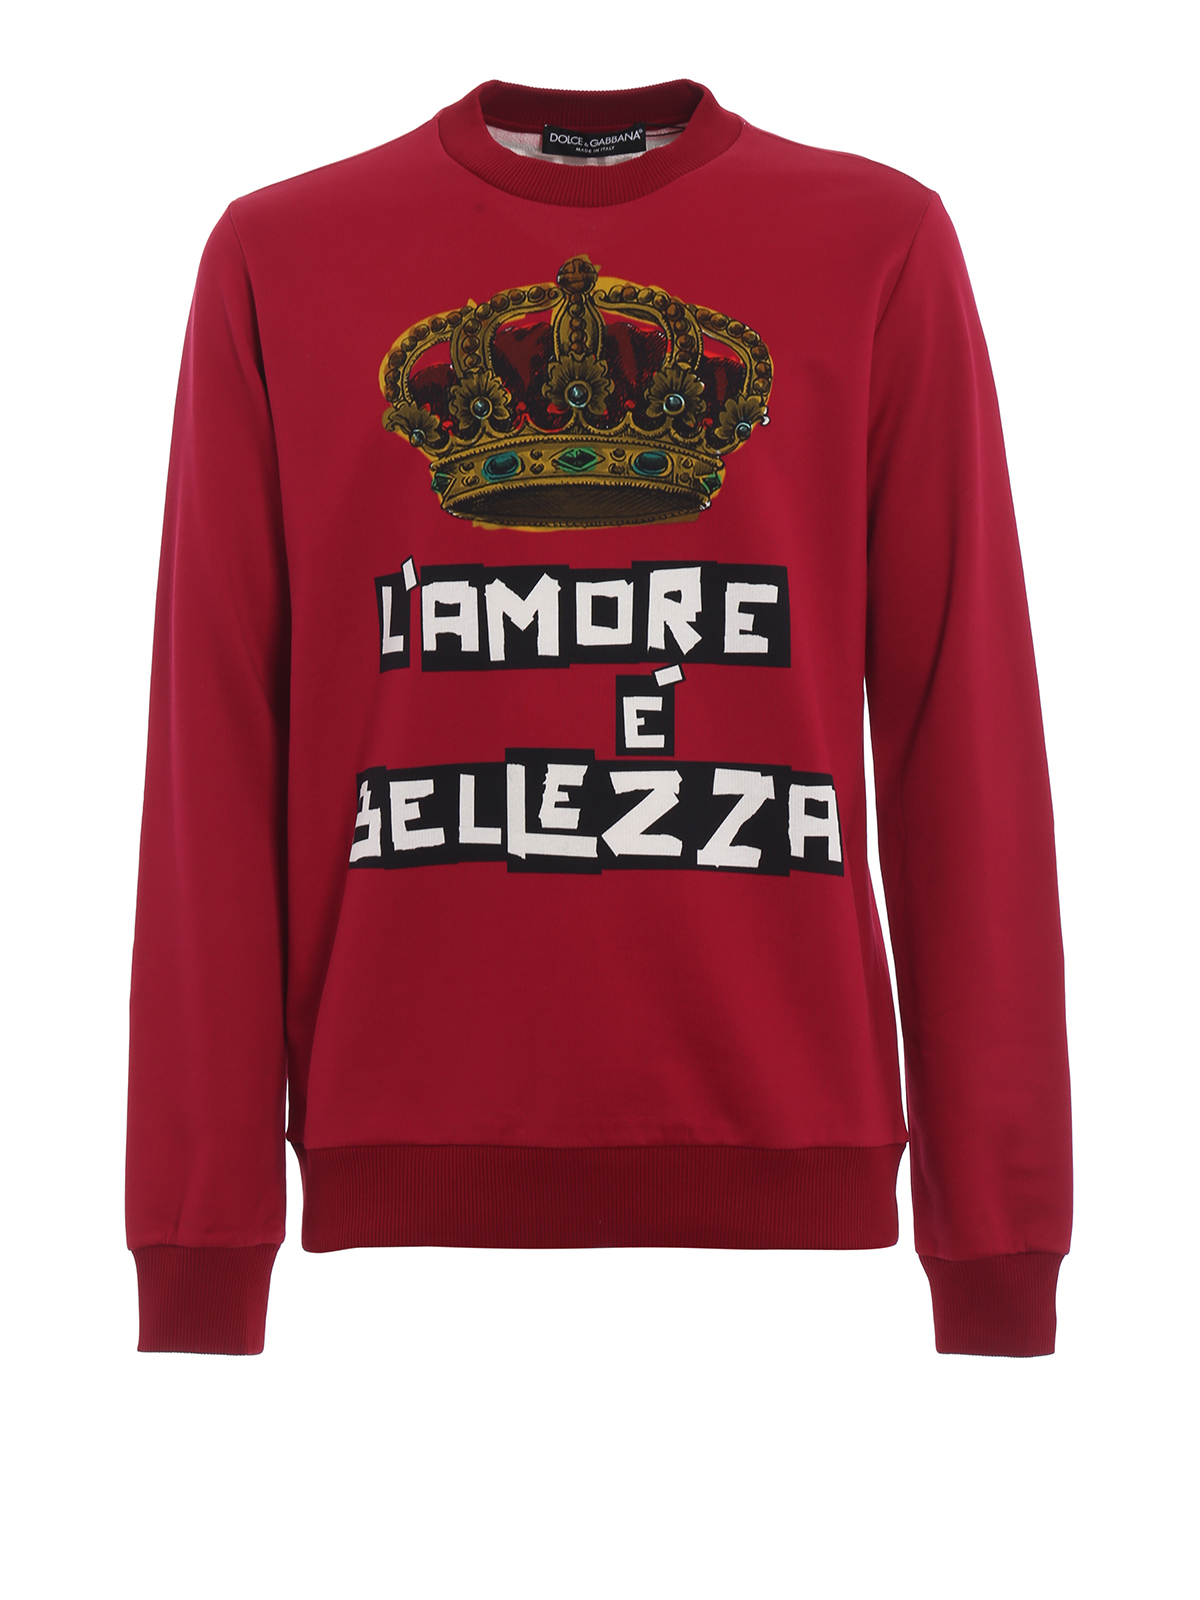 dolce and gabbana red sweater